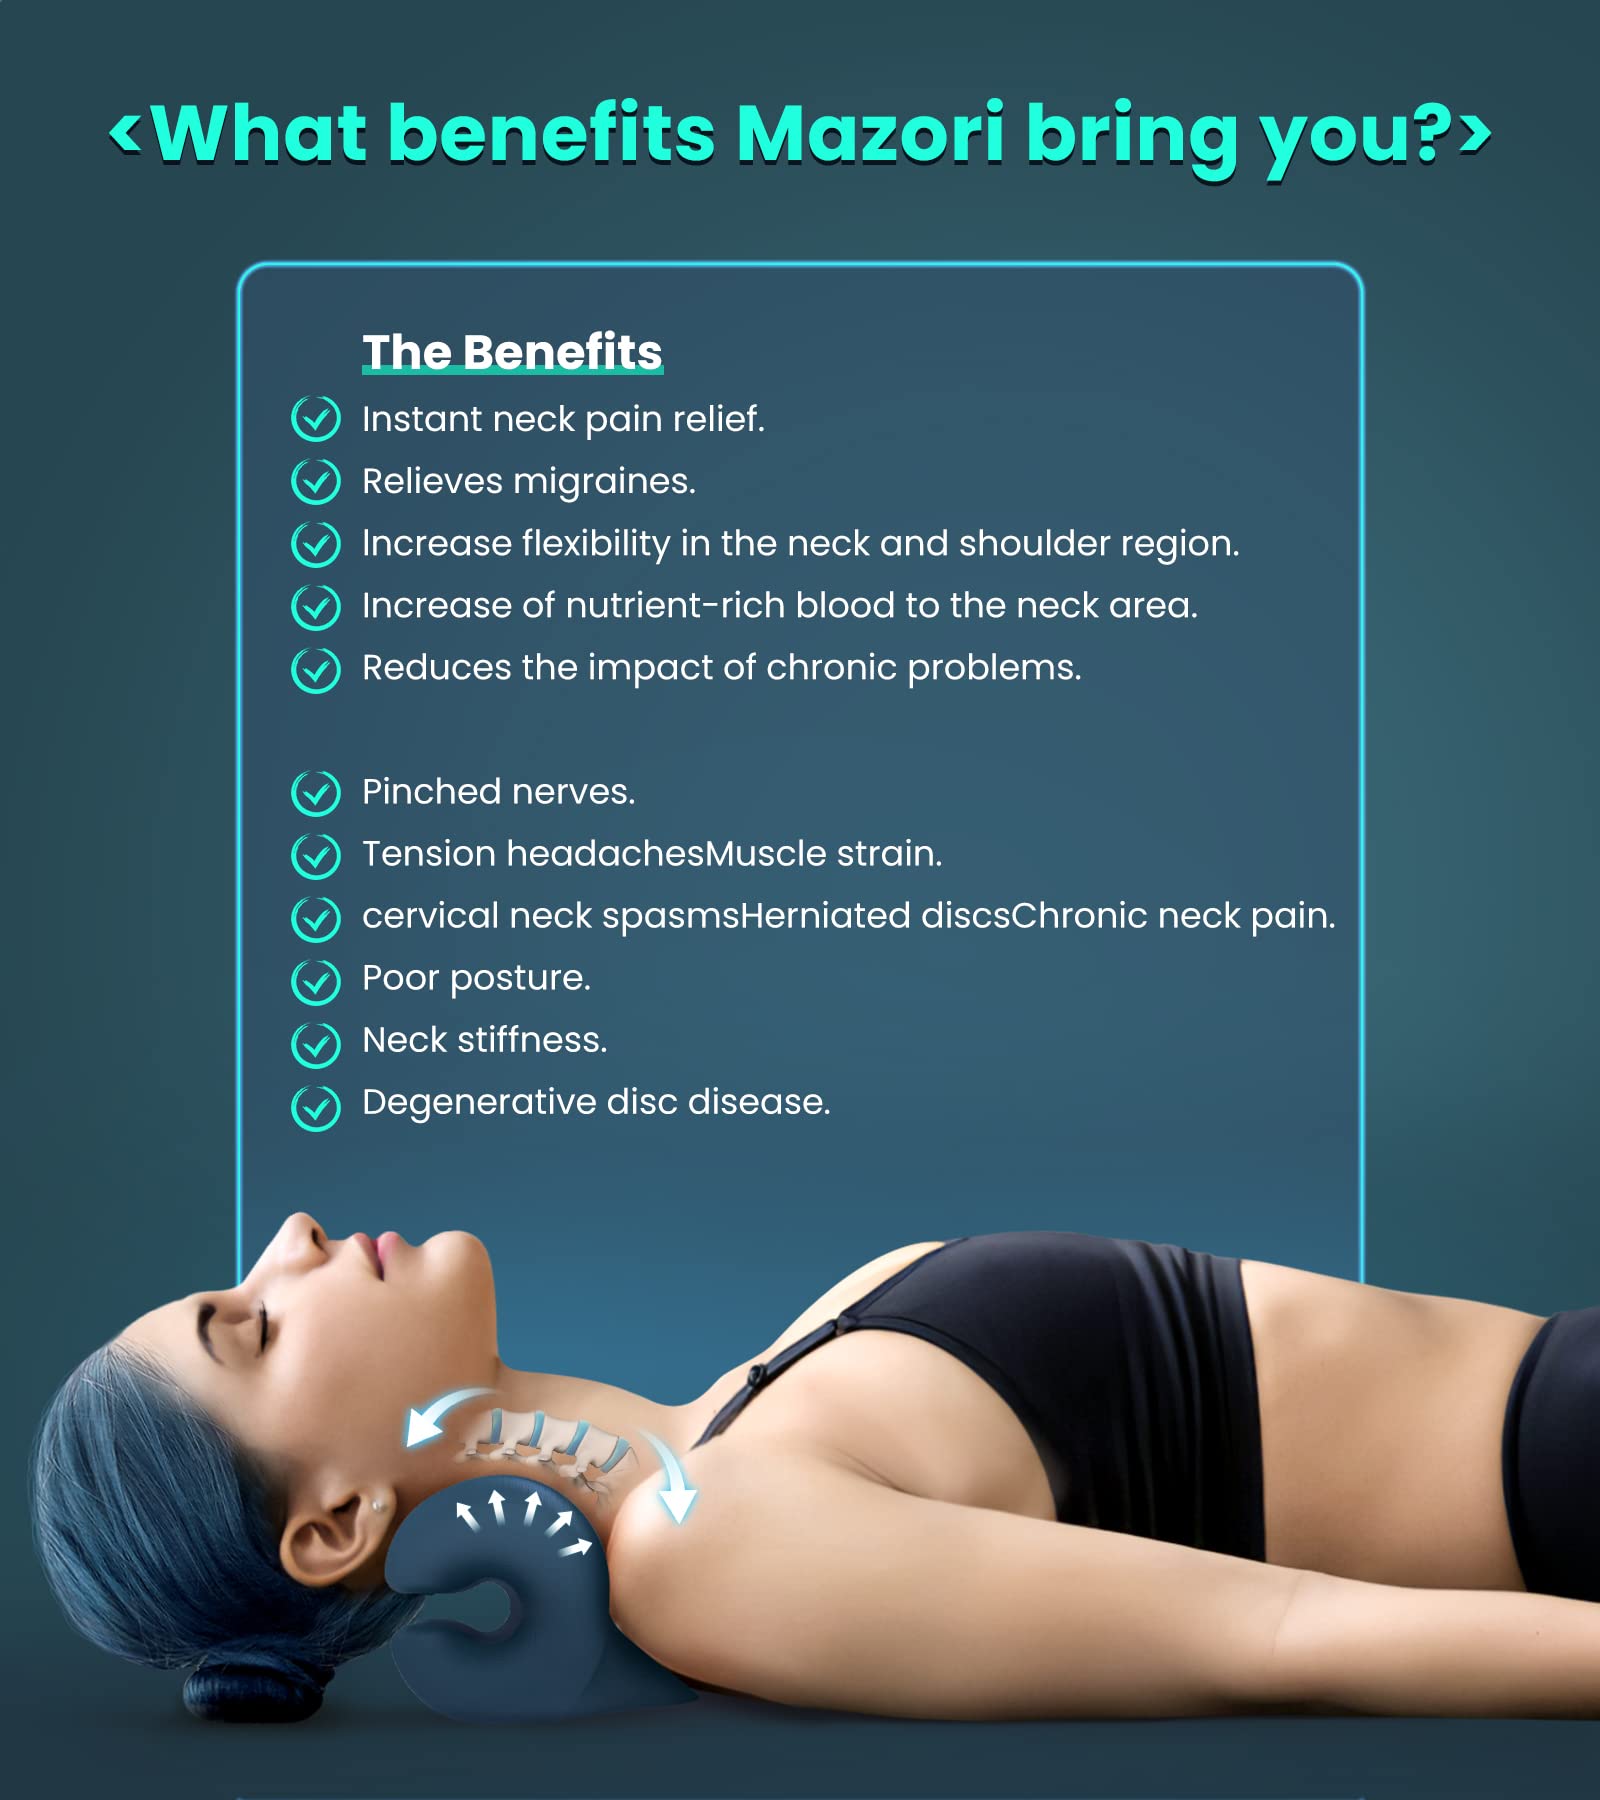 Mazori Odorless Neck Stretcher for Neck Pain Relief 2 Modes, Neck Cervical Traction Device Pillow for Spine Alignment, Chiropractic Neck and Shoulder Relaxer for TMJ Headache Muscle Tension